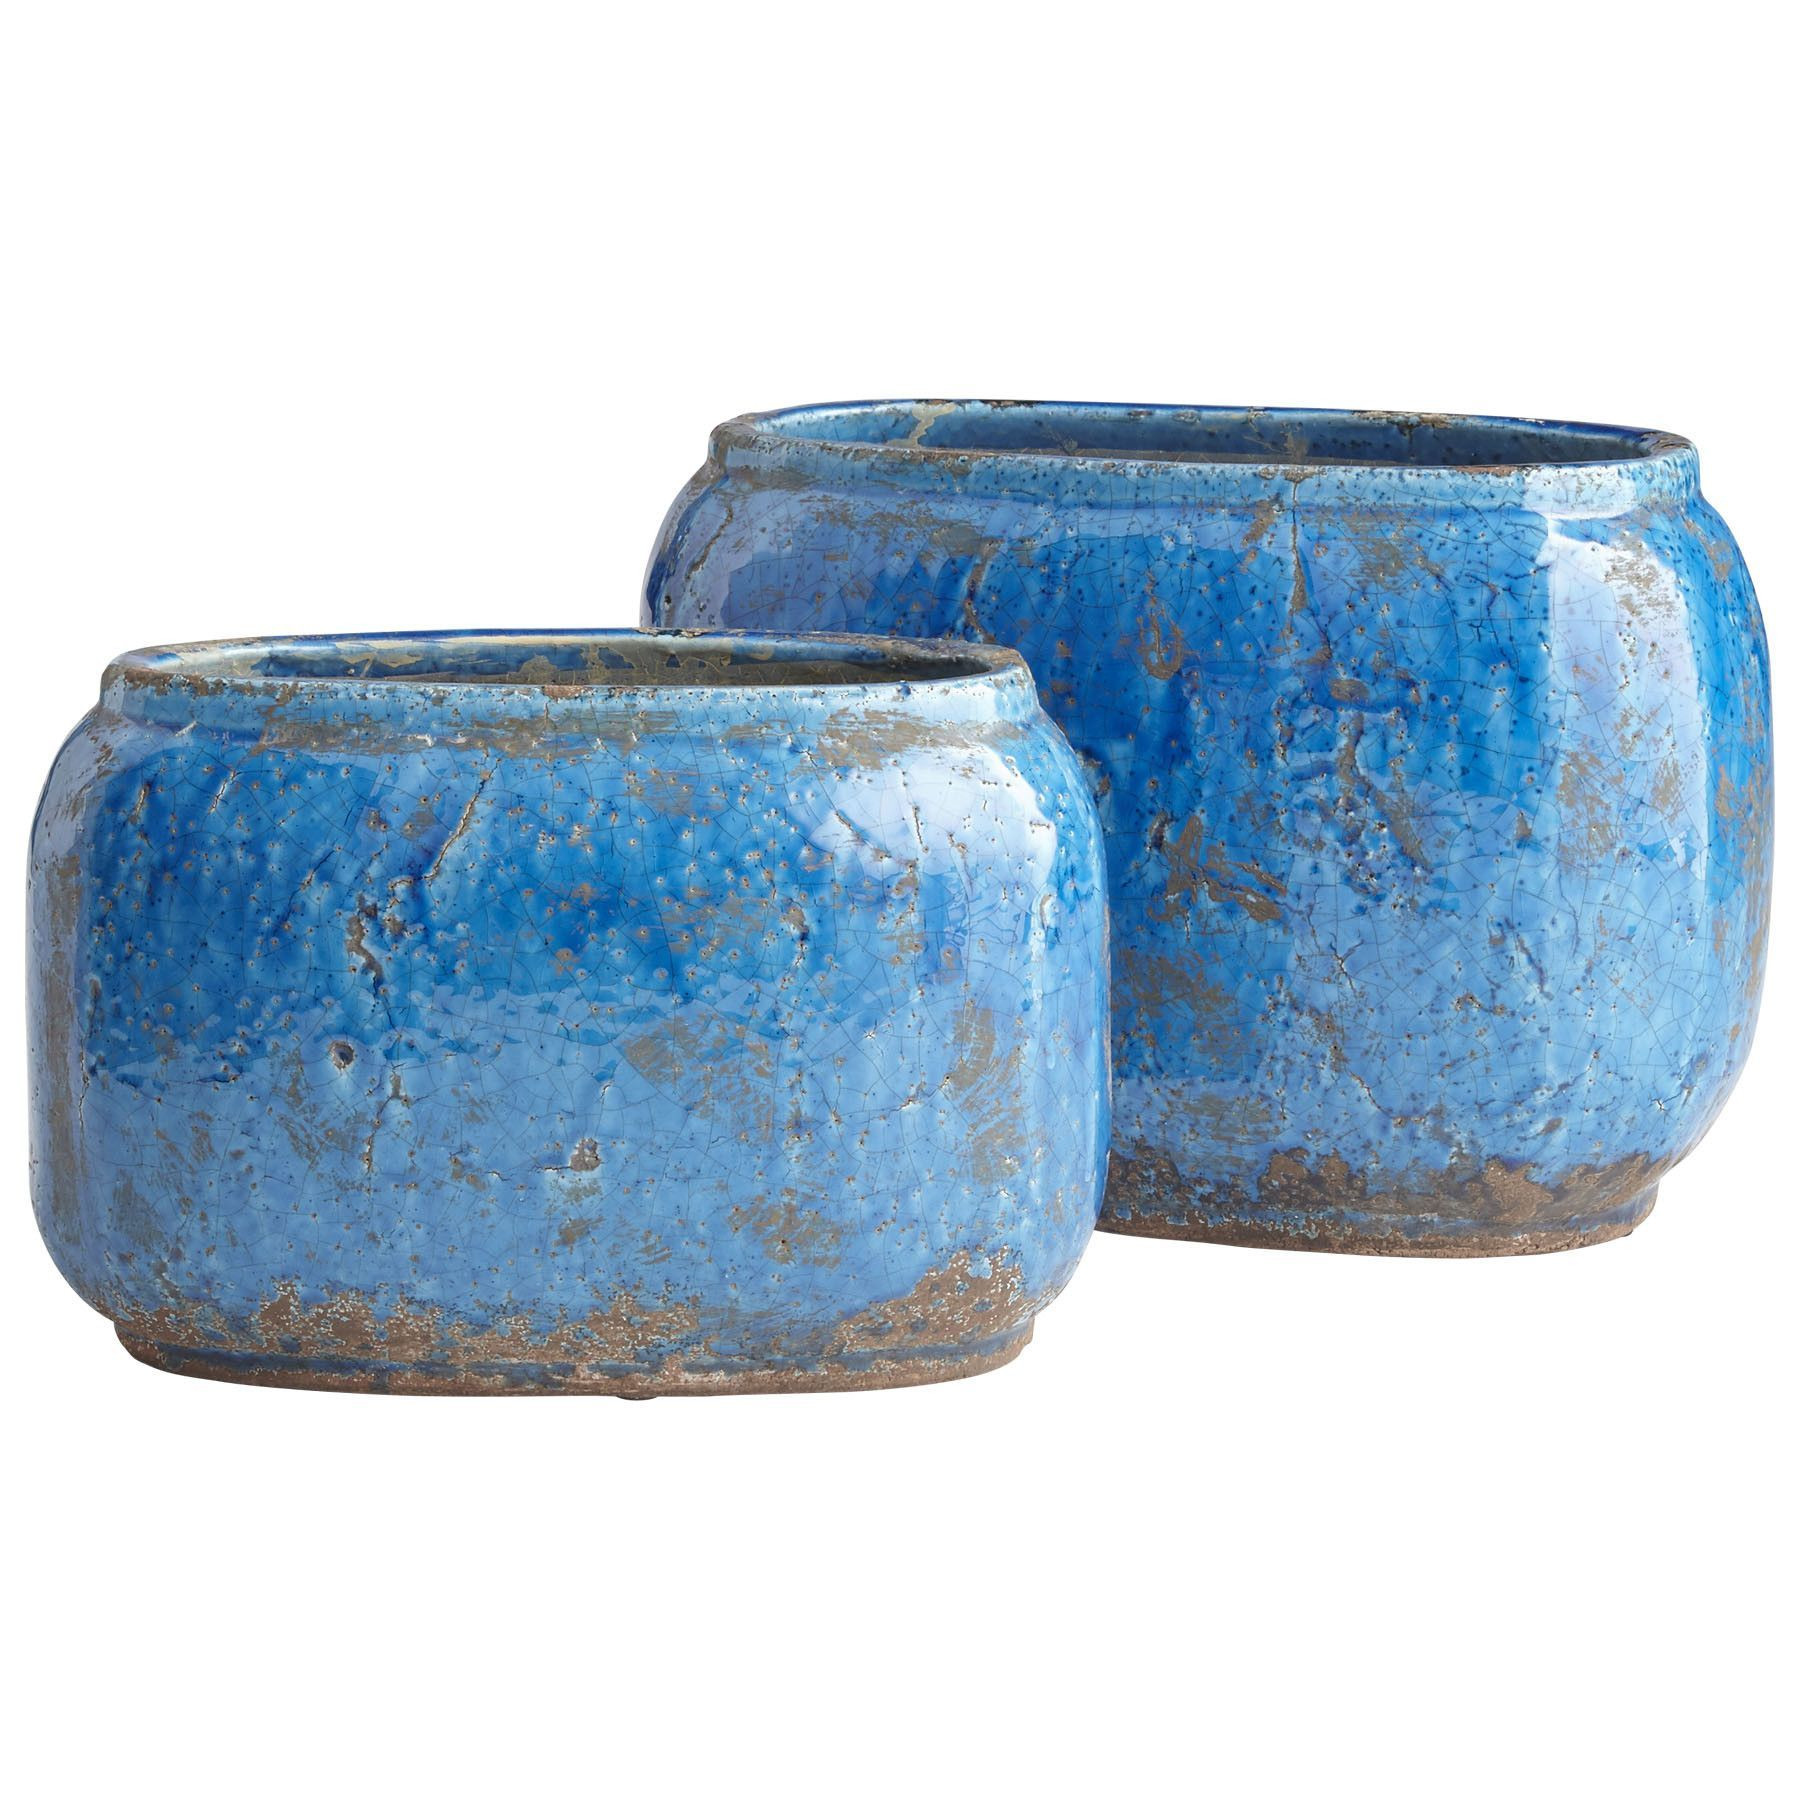 24 Great Large Terracotta Floor Vases 2024 free download large terracotta floor vases of ventura planter large vases bowls trays platters of chez throughout large ventura planter is constructed of terracotta with a blue glaze finish